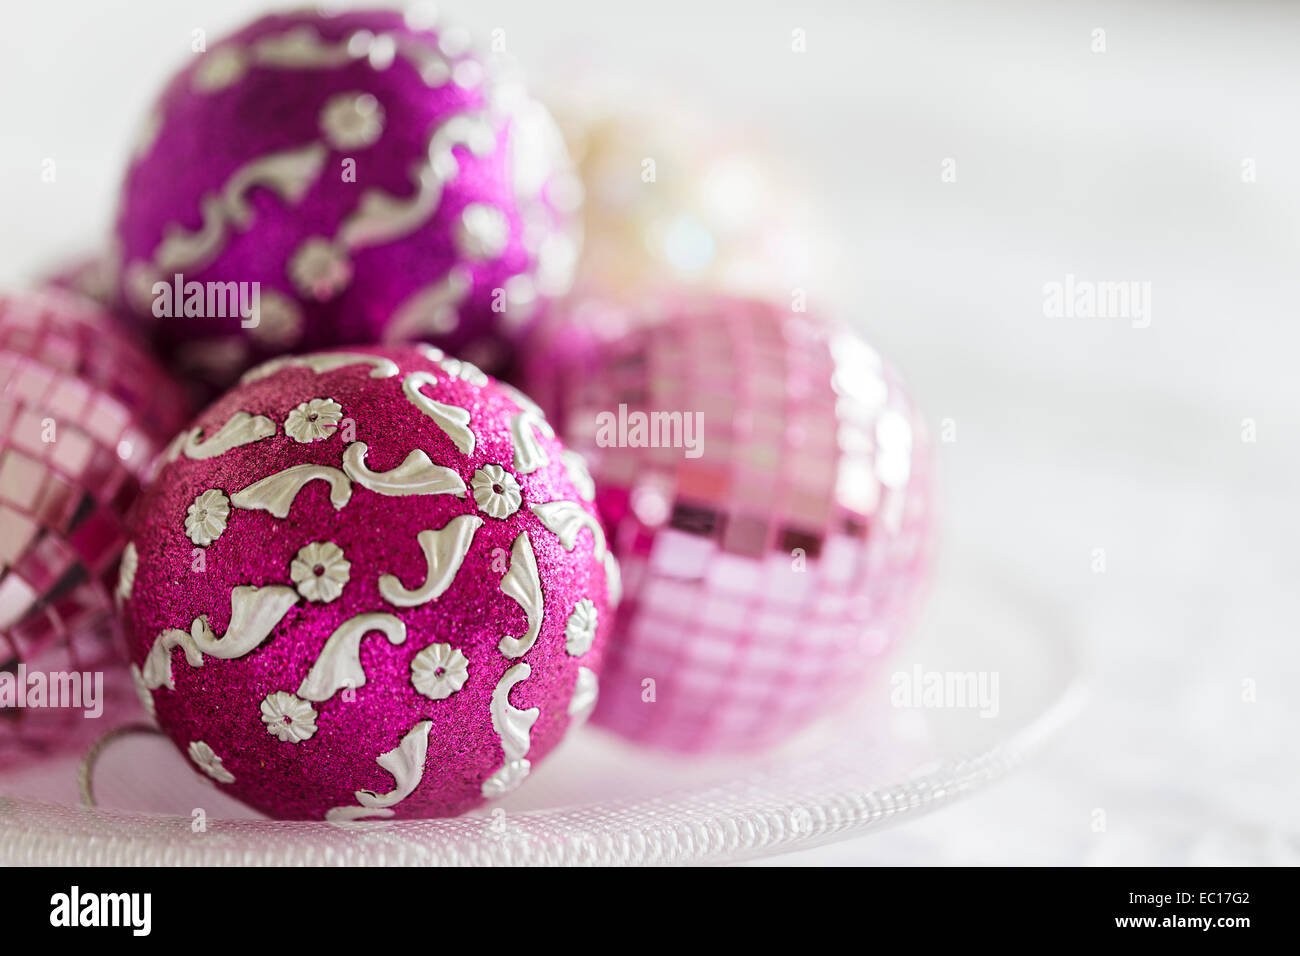 Pink and purple Christmas decorations on a glass plate Stock Photo